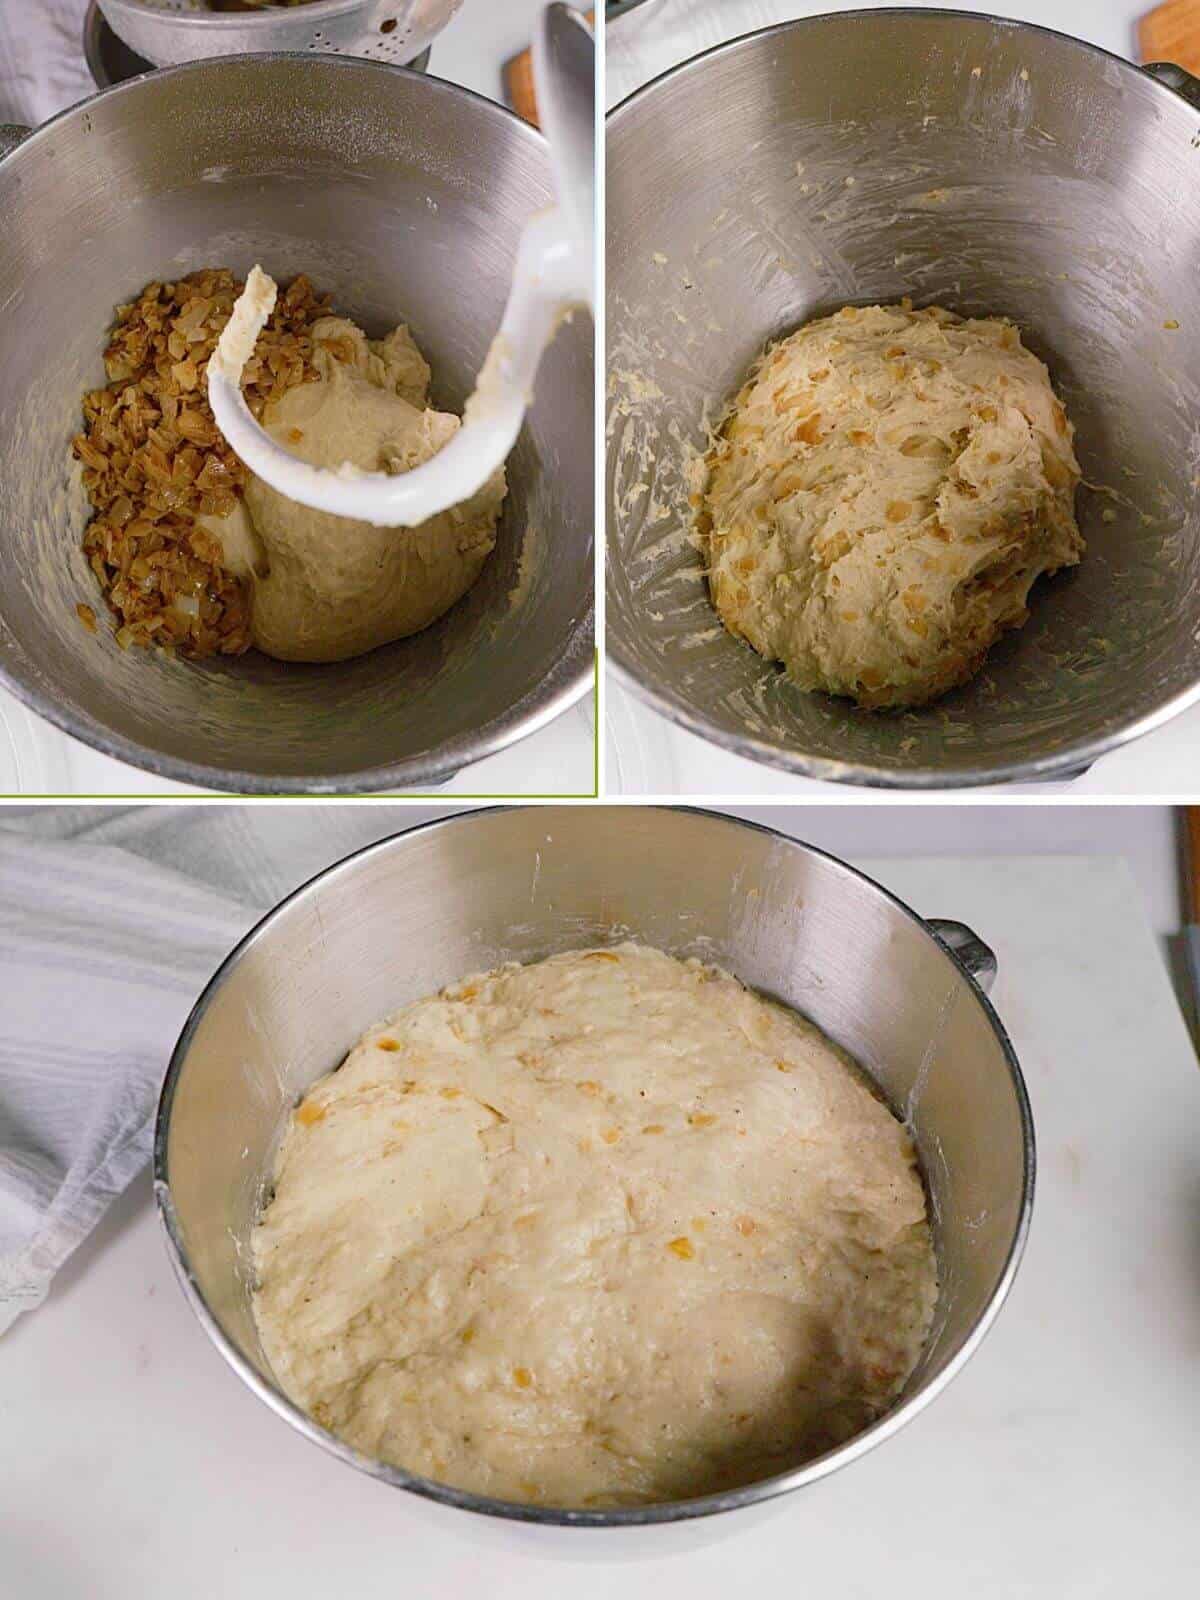 Mixing cooked onions into the dough.